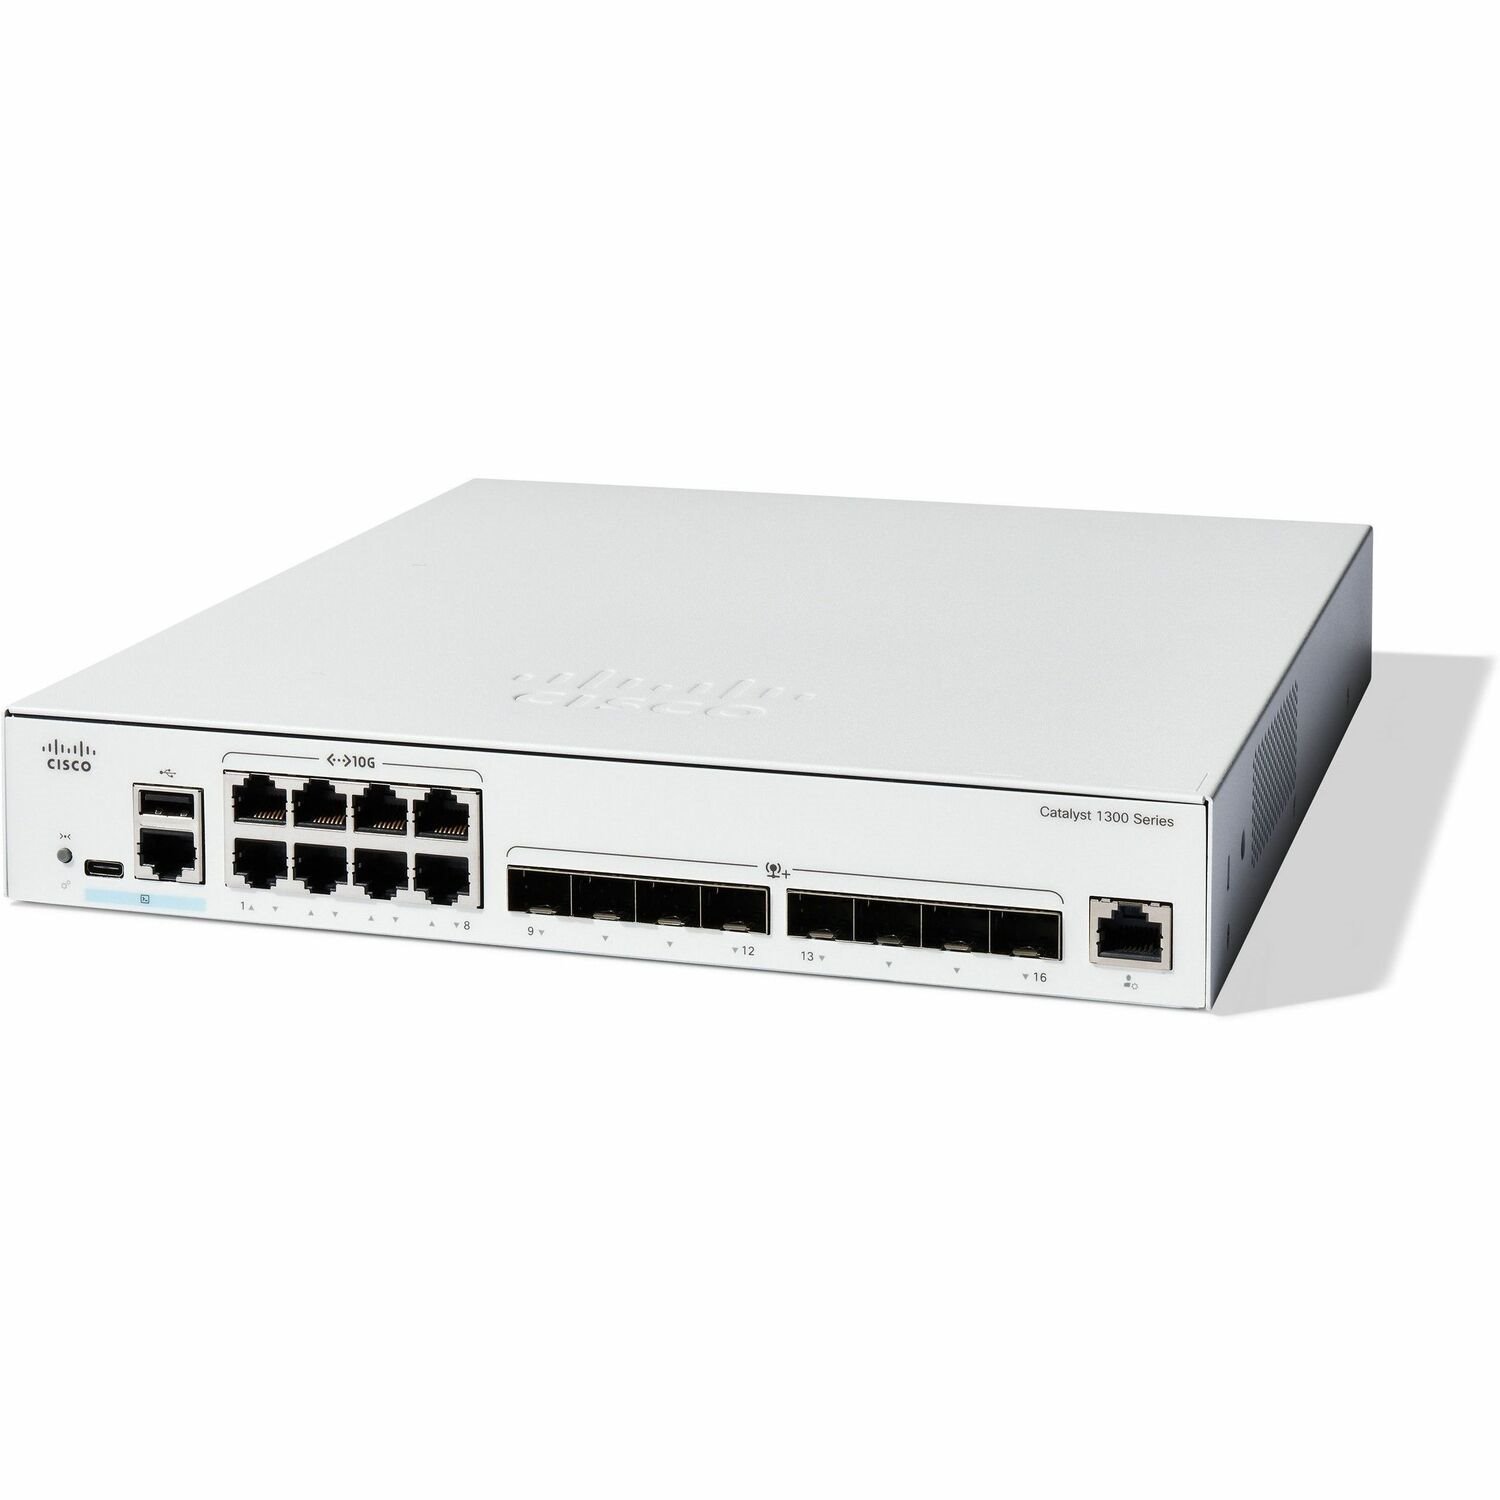 Cisco Catalyst 1300 C1300-16XTS 8 Ports Manageable Layer 3 Switch - 10 Gigabit Ethernet - 10GBase-T, 10GBase-X